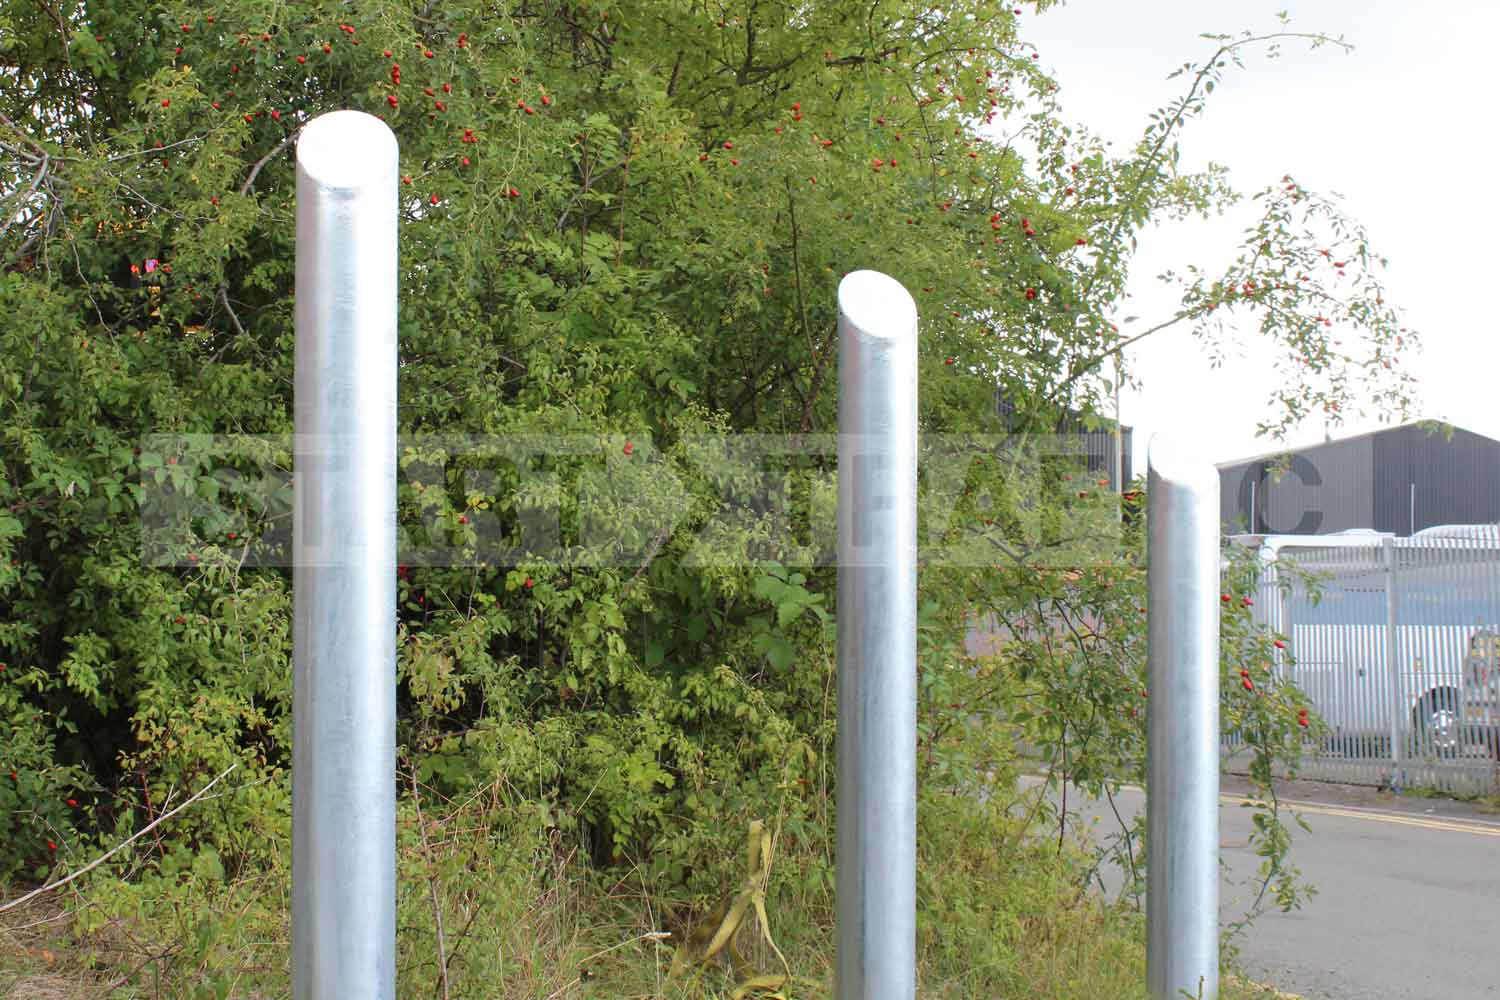 Mitre-Top bollards being used to protect soft verge